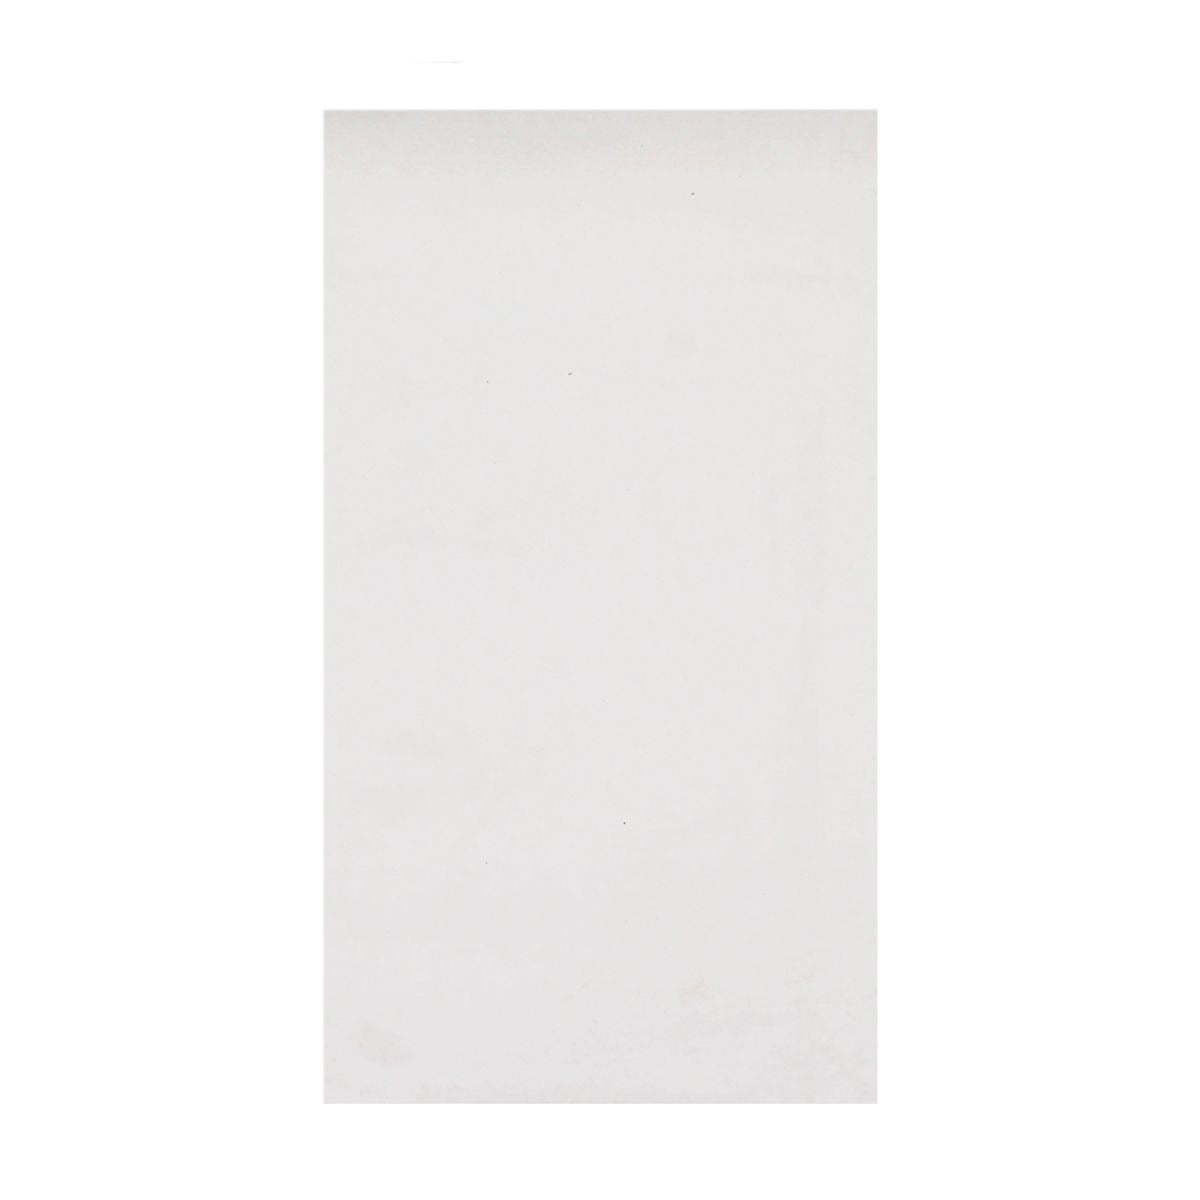 165mm x 100mm Eco Friendly Recyclable White Padded Envelope [Qty 200] - All Colour Envelopes